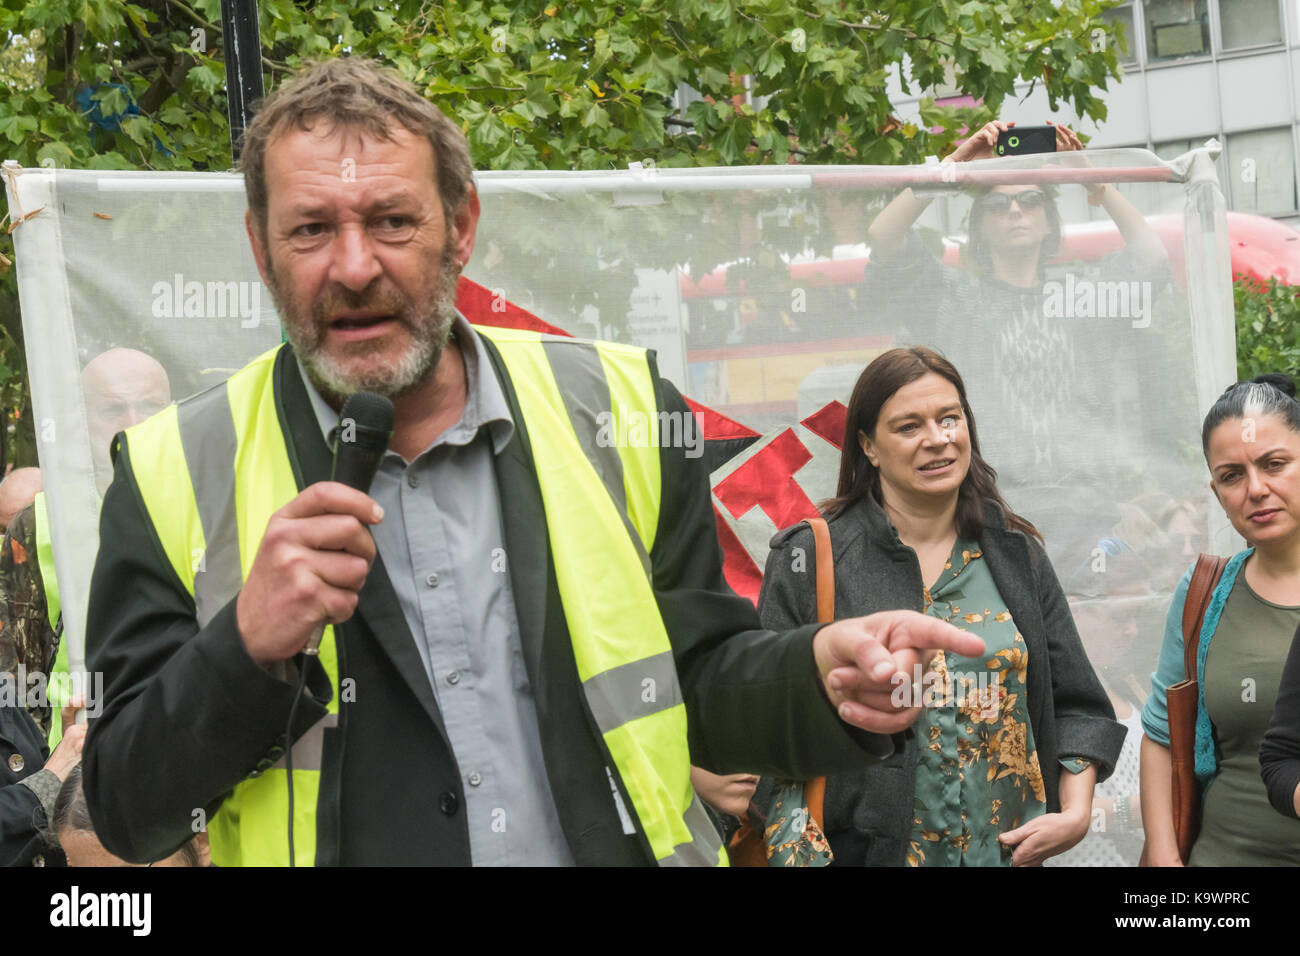 London, UK. 23rd Sep, 2017. London, UK. 23rd September 2017. One of the speakers from the organising group StopHDV speaks at the rally before hundreds march in North London from Tottenham to Finsbury Park against the so called Haringey Development Vehicle, under which Haringey Council is making a huge transfer of council housing to Australian multinational Lendlease. This will result in the imminent demolition of over 1,300 council homes on the Northumberland Park estate, followed by similar loss of social housing across the whole of the borough. At Â£2 billion, his is the largest giveaw Stock Photo